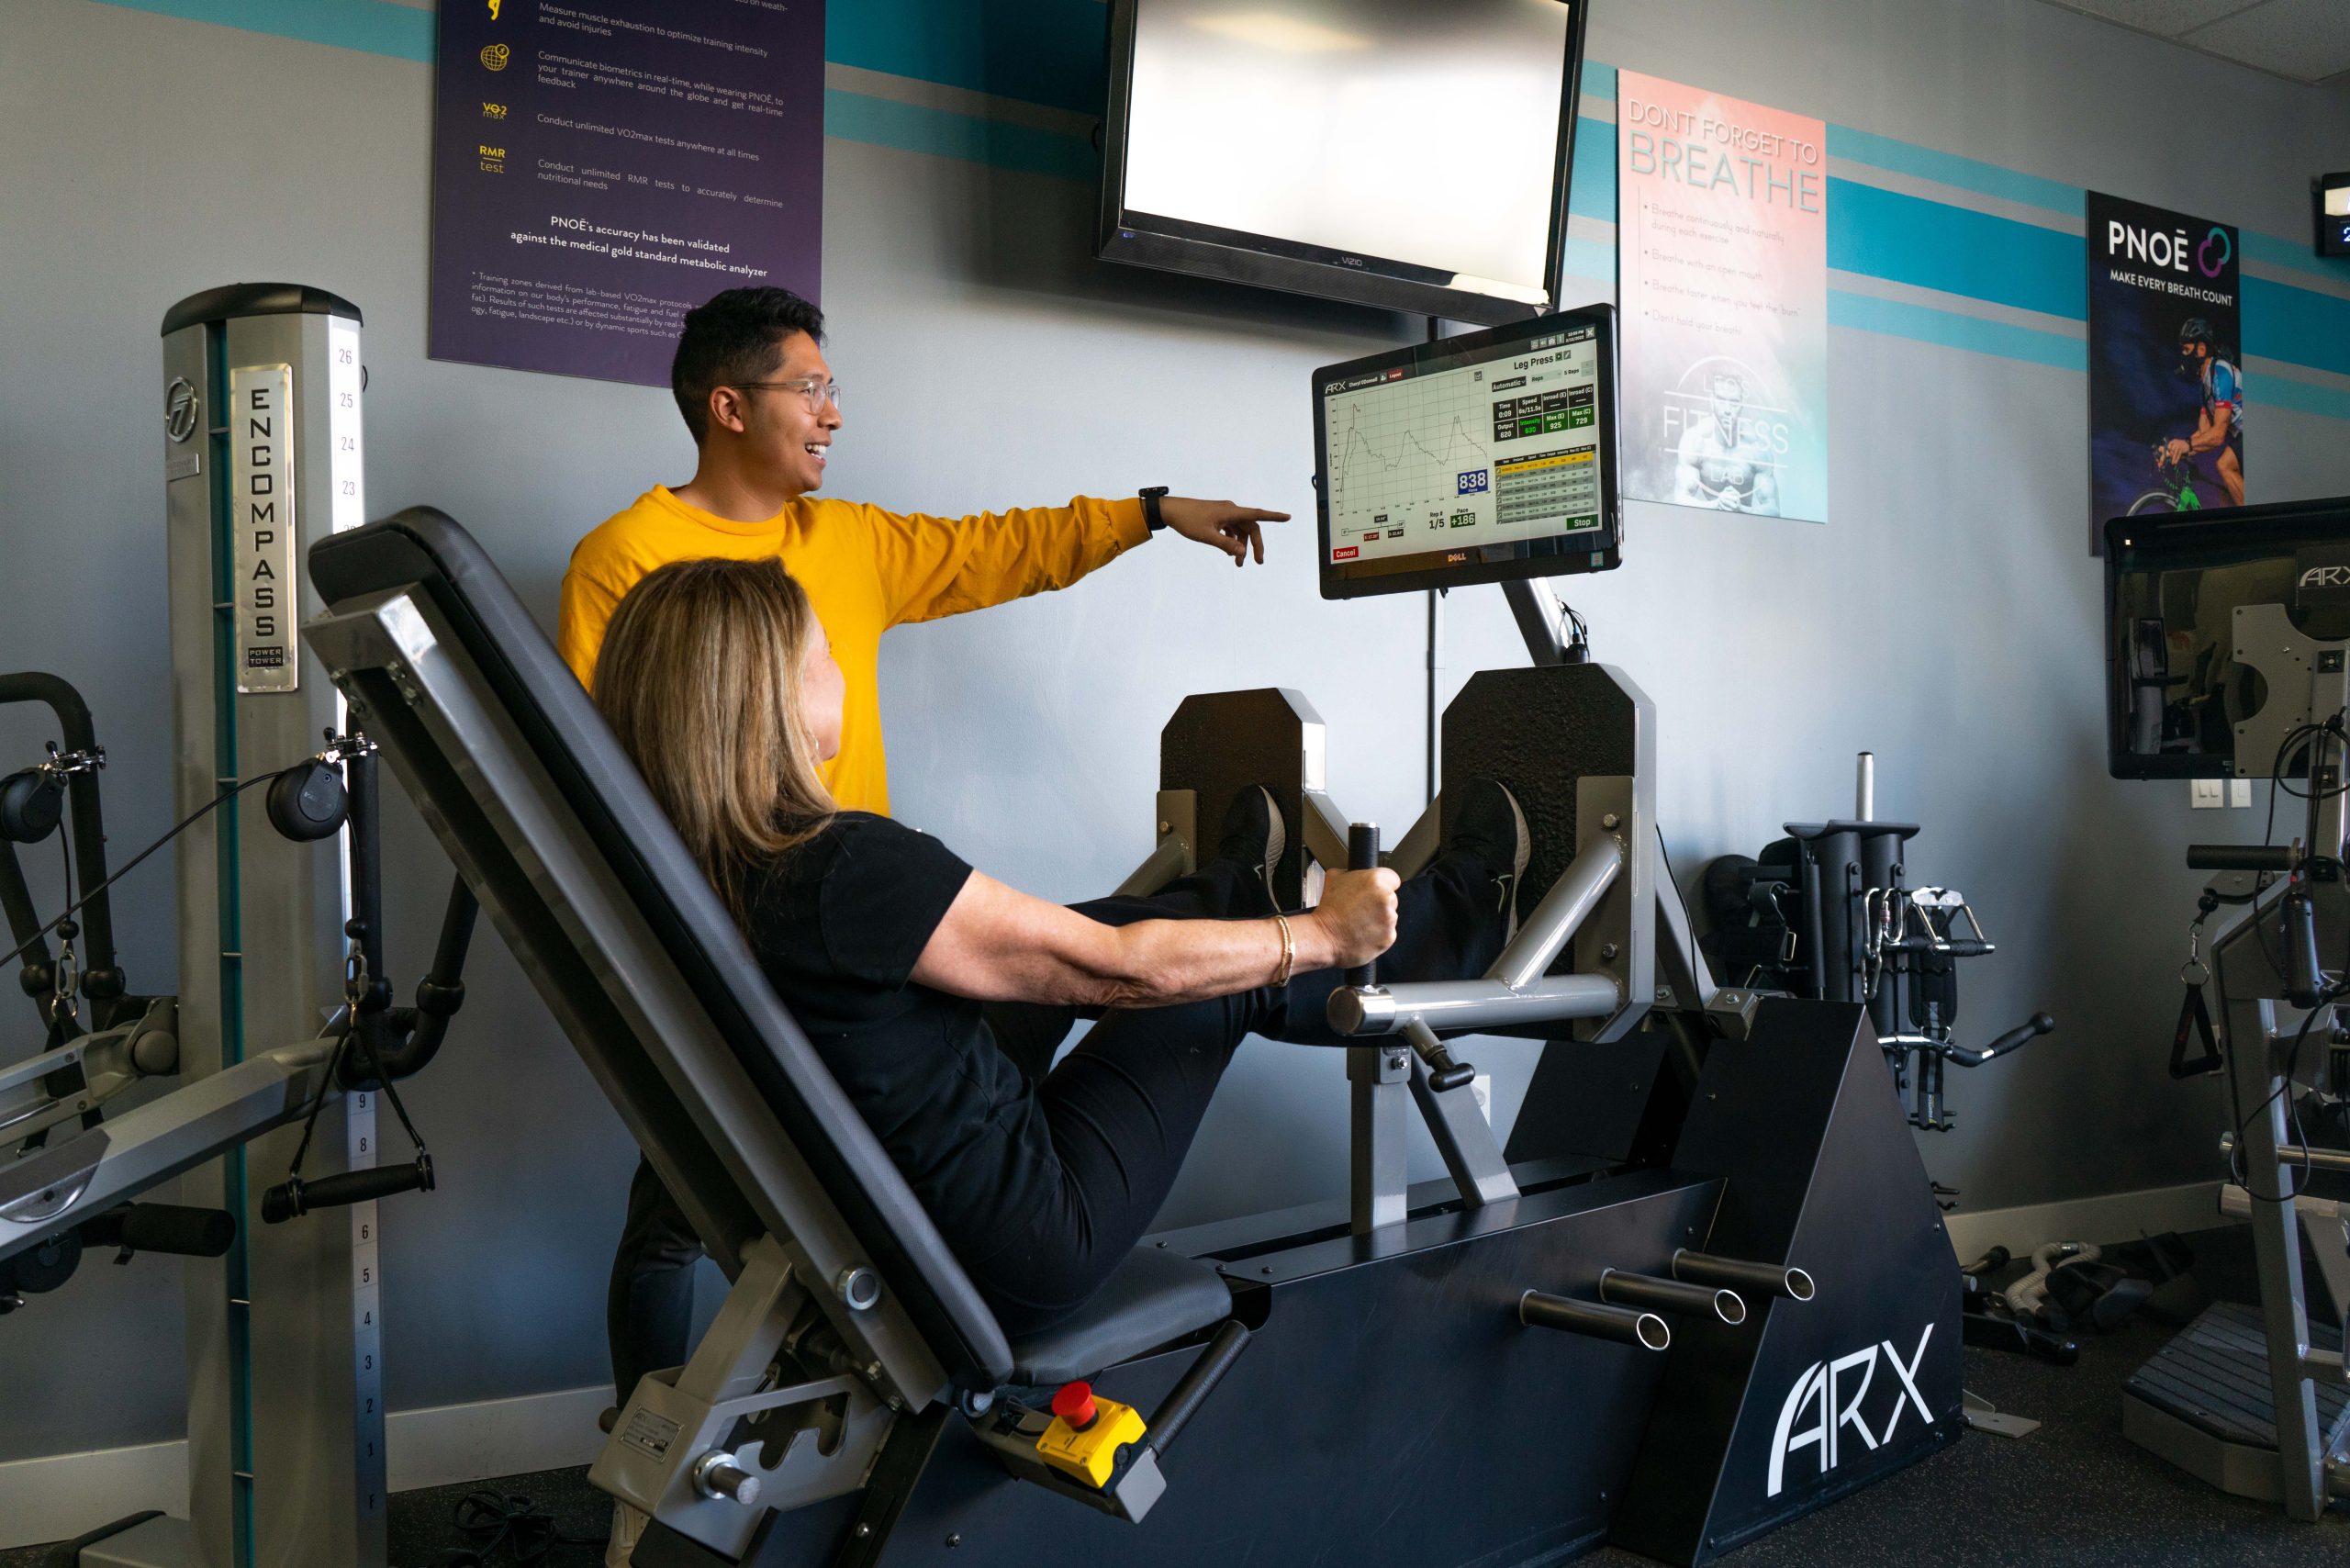 Client and personal trainer working out on the ARX machine at Leo's Fitness Lab.